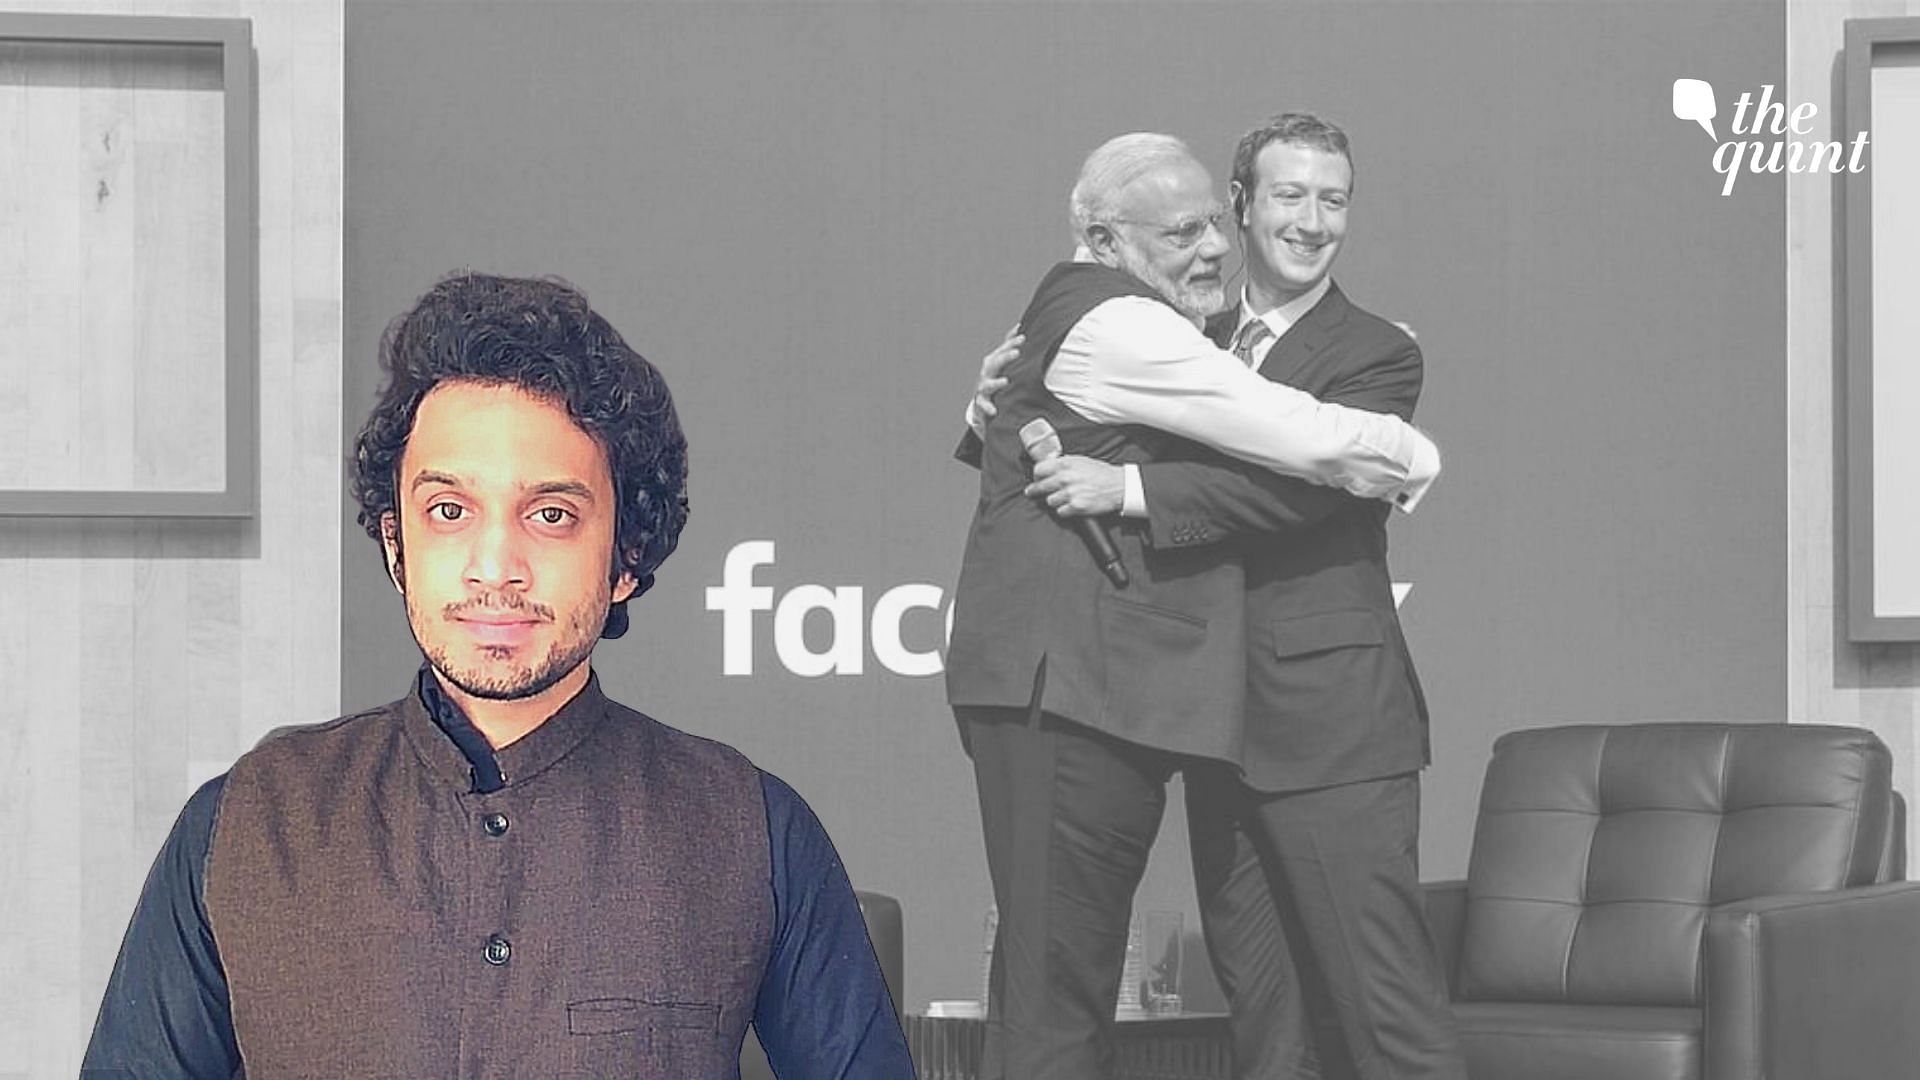 In what can be seen as one of the biggest political controversies Facebook is facing in India, the alleged political leaning of Facebook towards the BJP, as has been reported by WSJ, has given the Opposition more ammunition to target the Modi government.